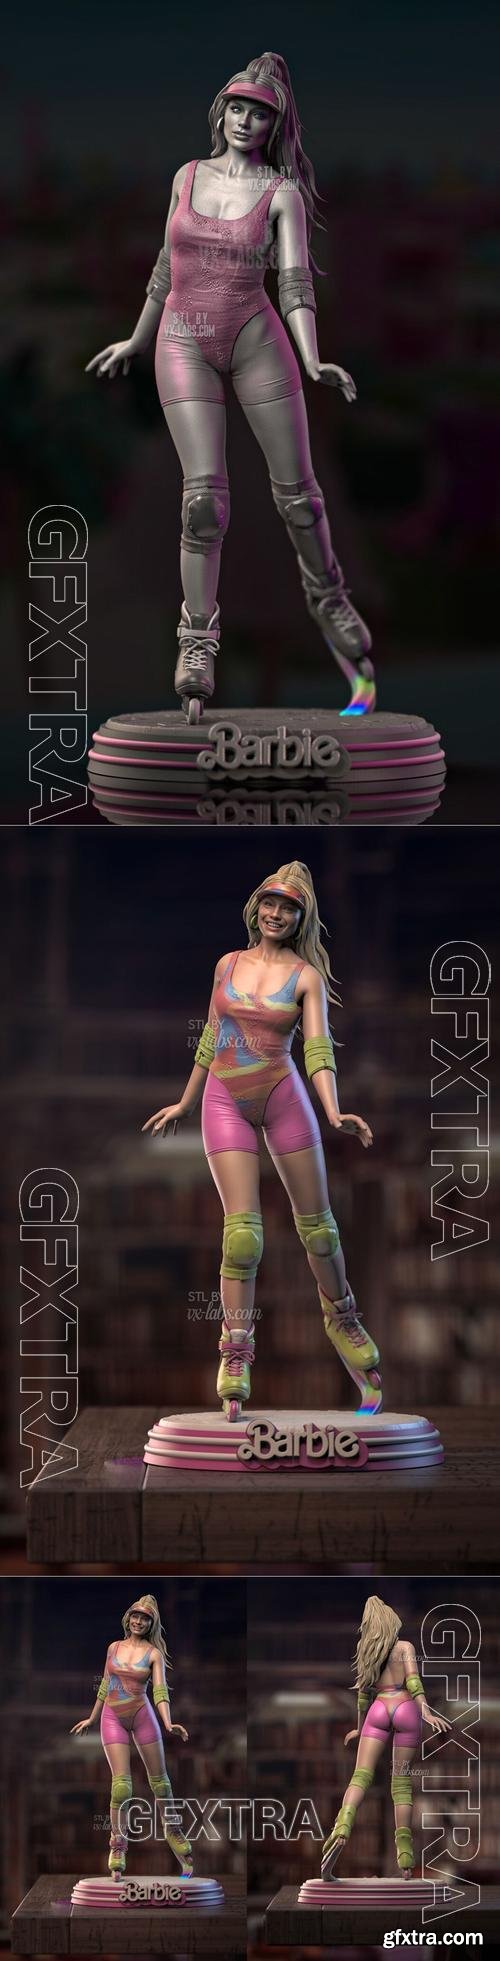 Barbie and Extras – 3D Print Model